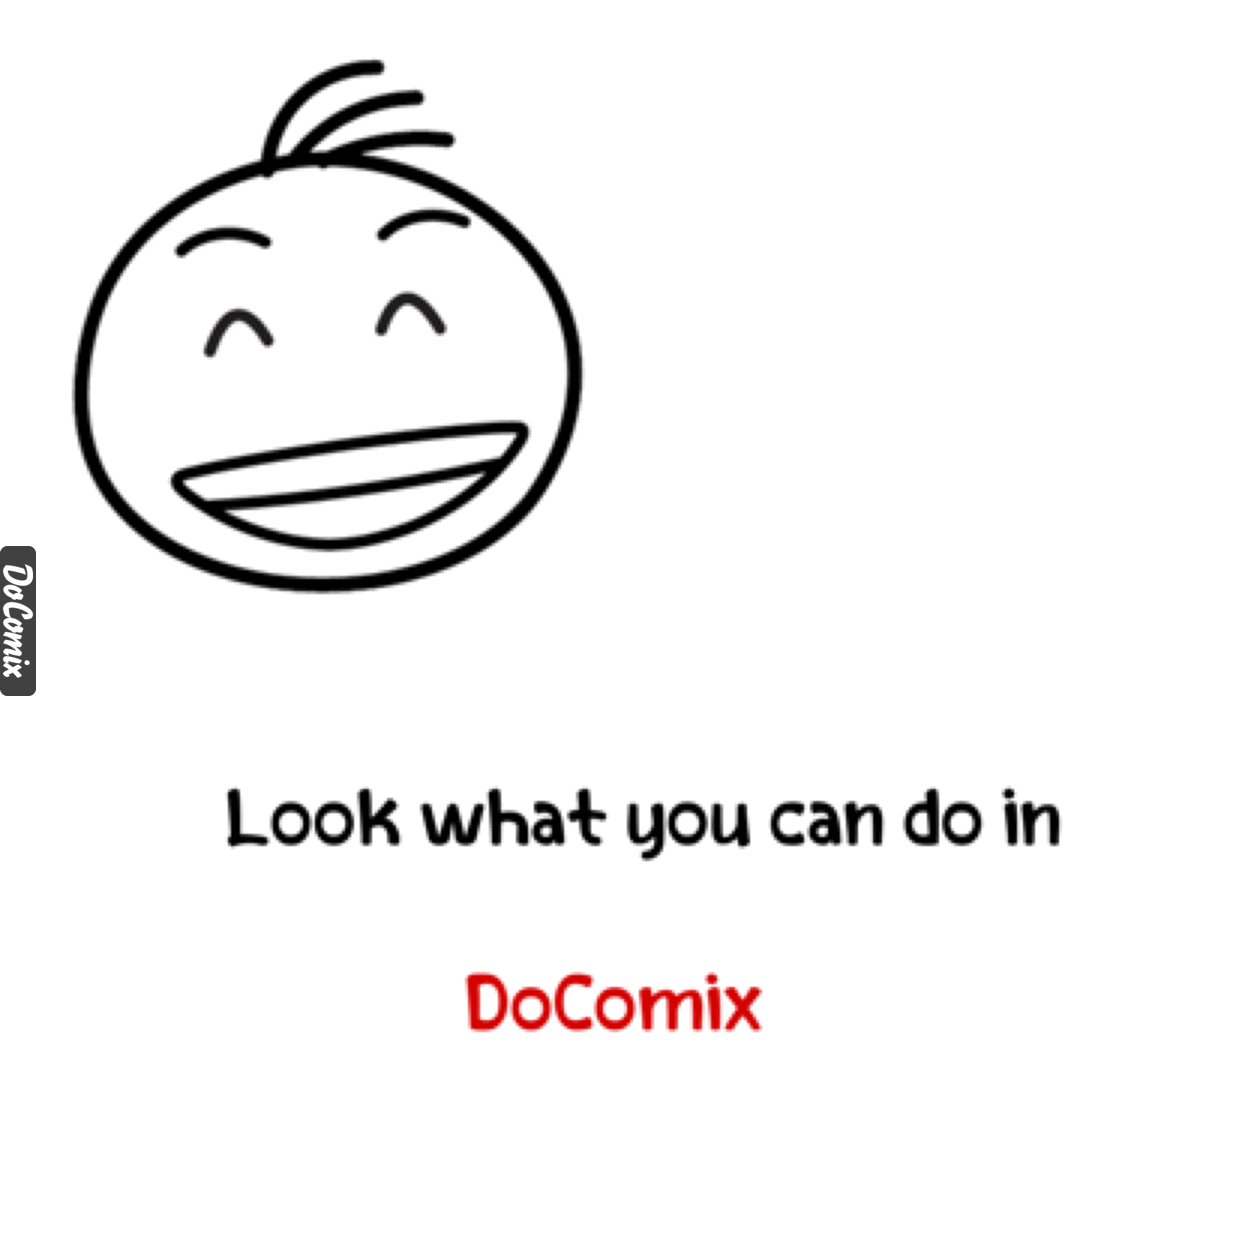 What you can do in docomix